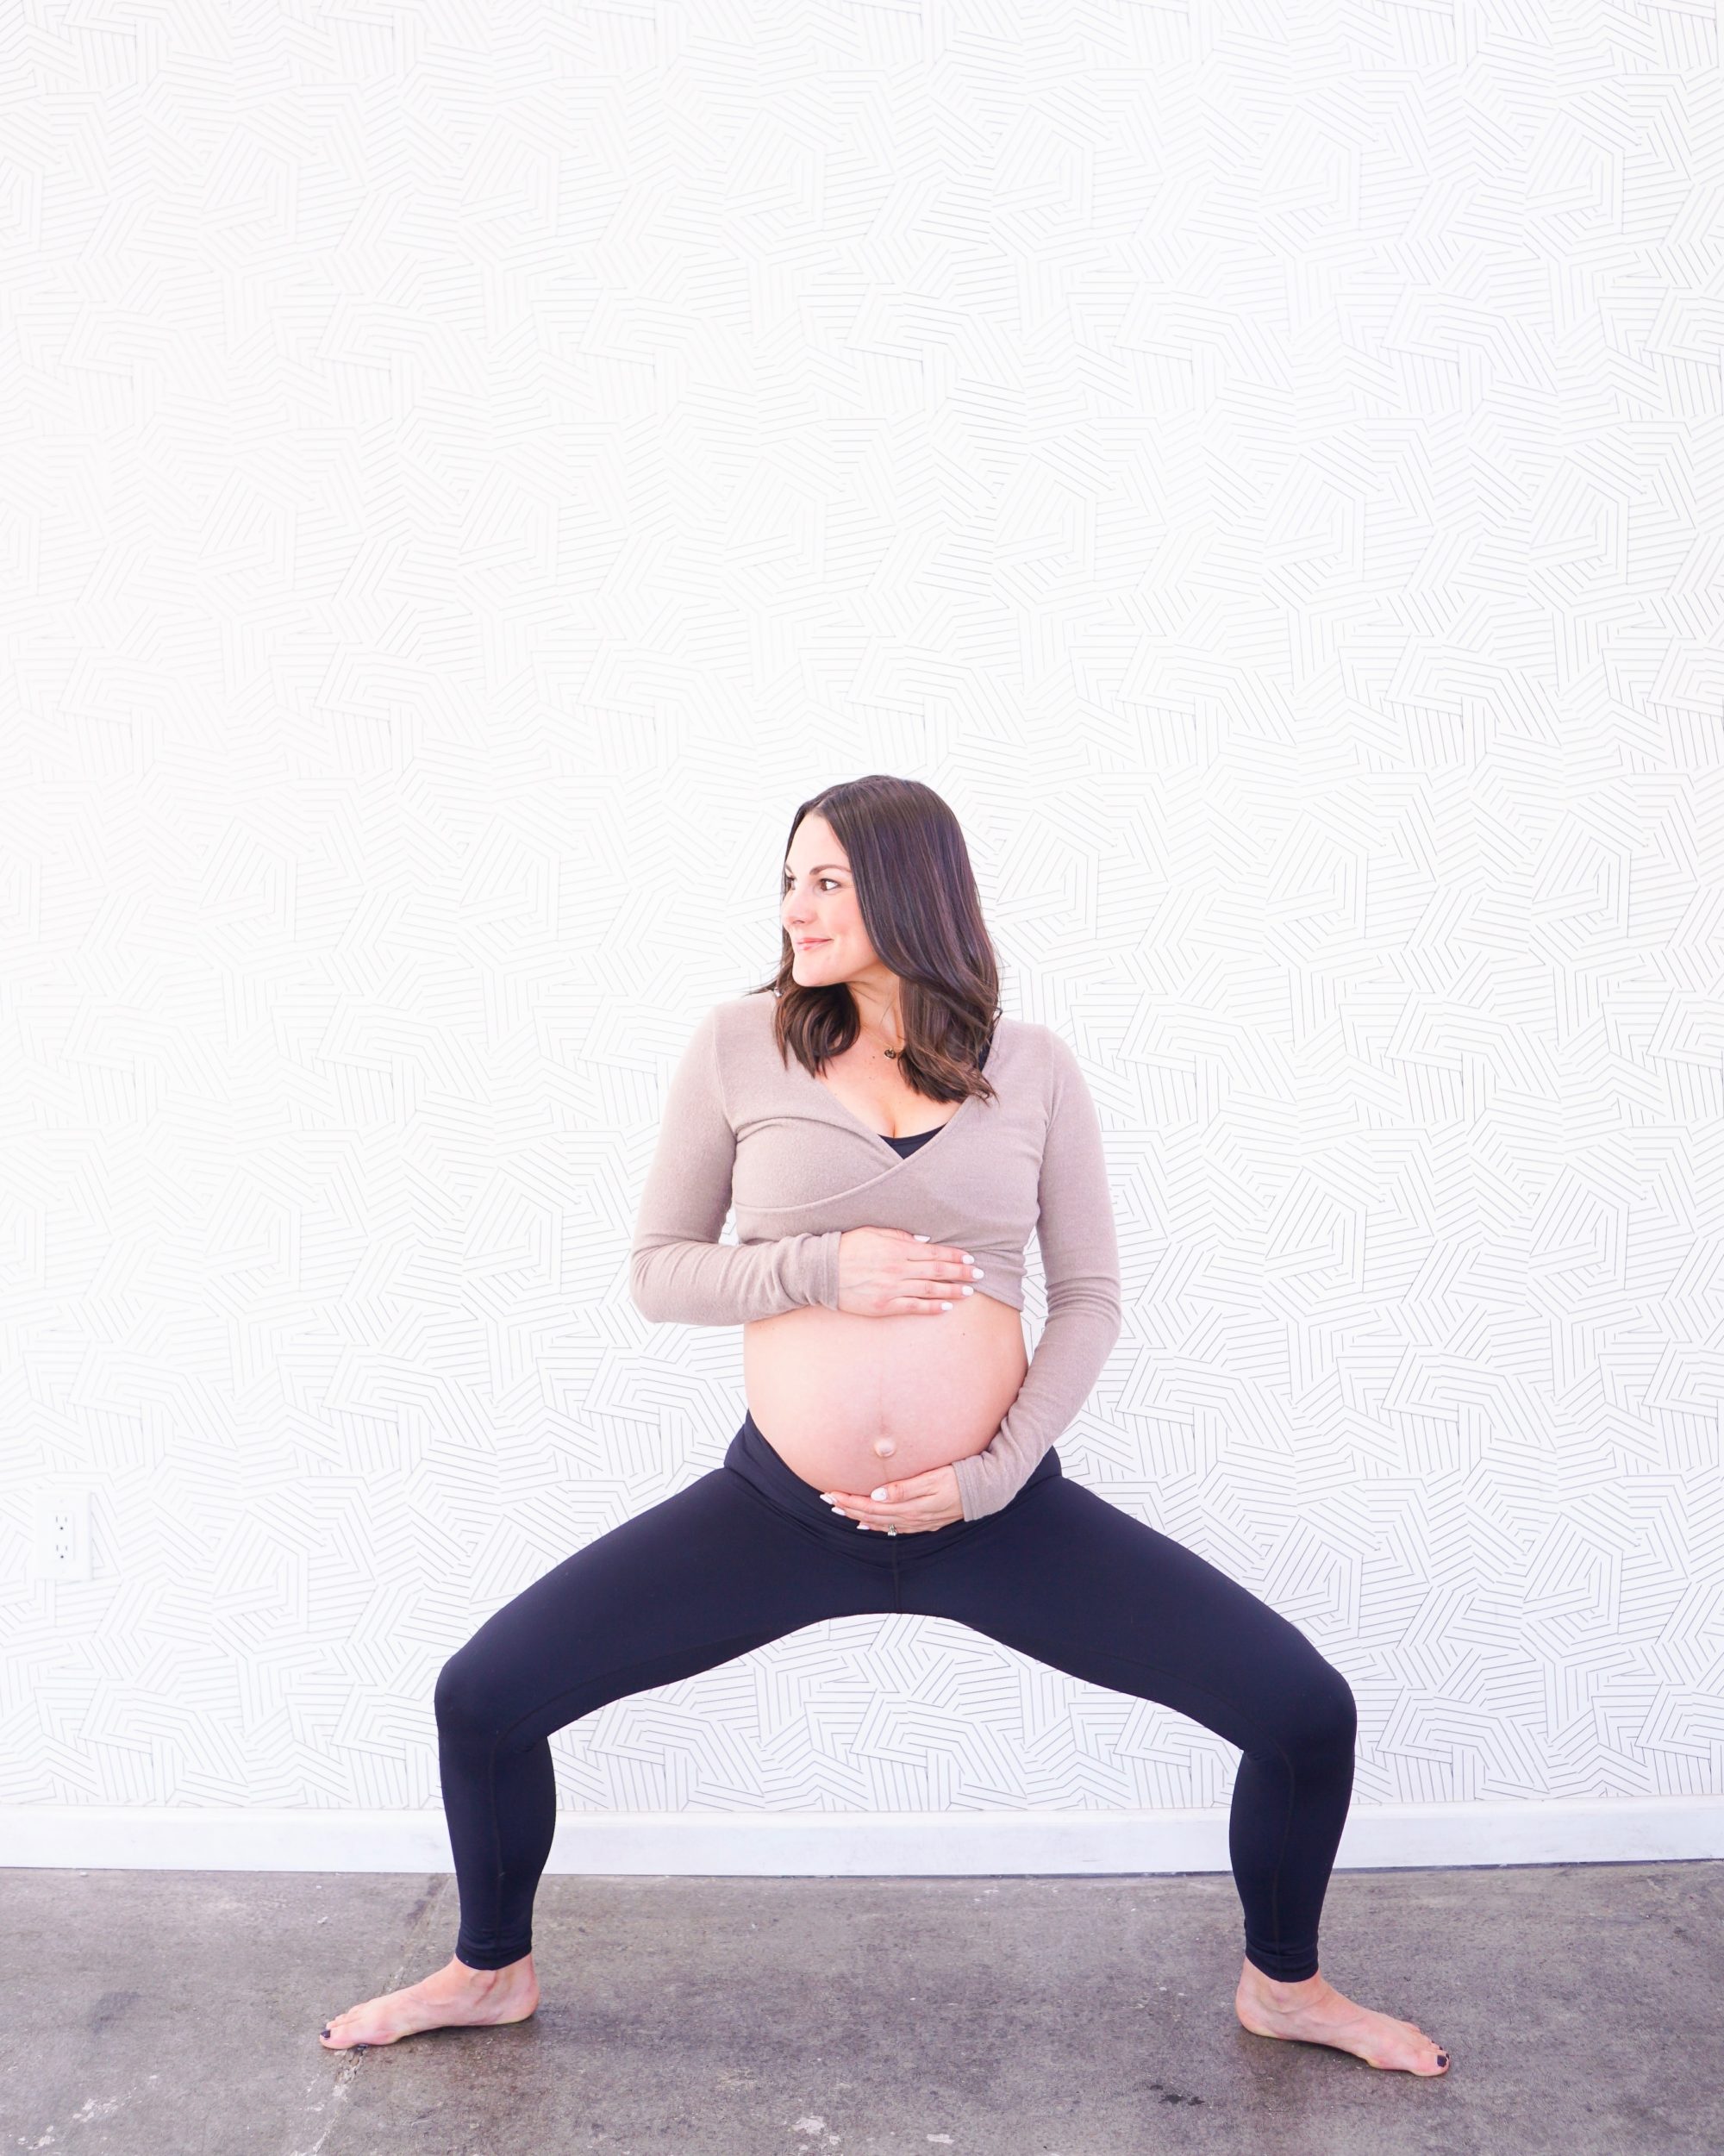 Yoga Poses To Avoid During Pregnancy With Modifications Whitney E Rd